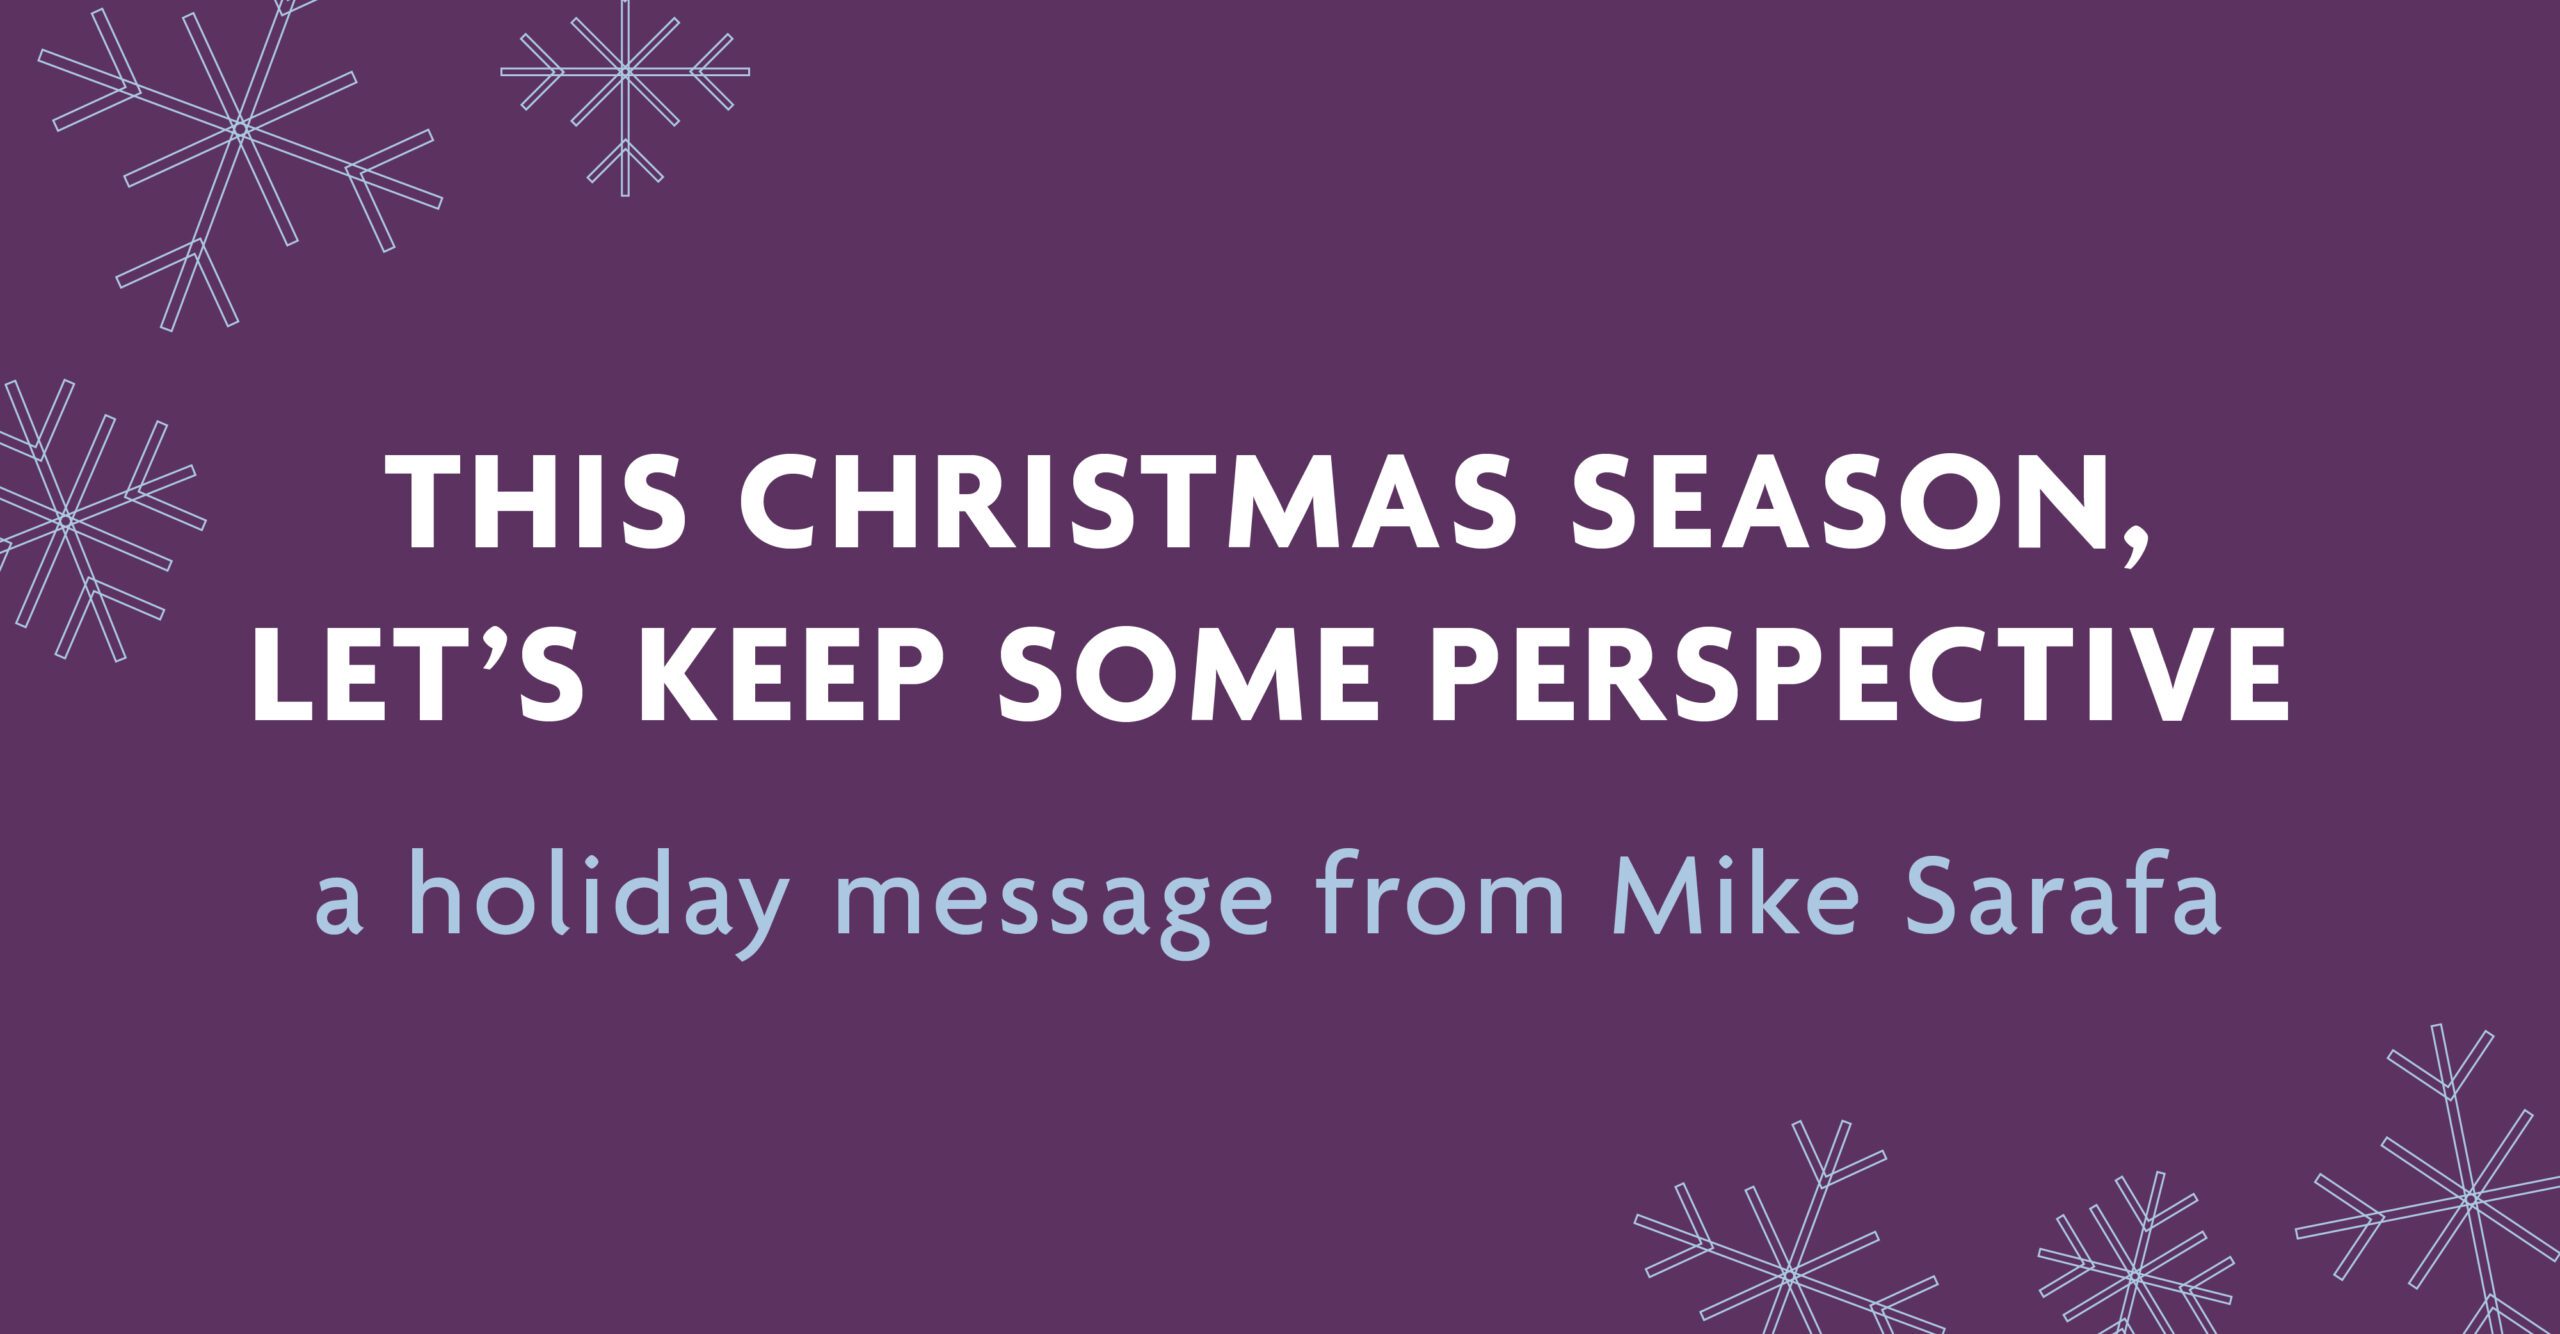 A Holiday Message from Mike Sarafa